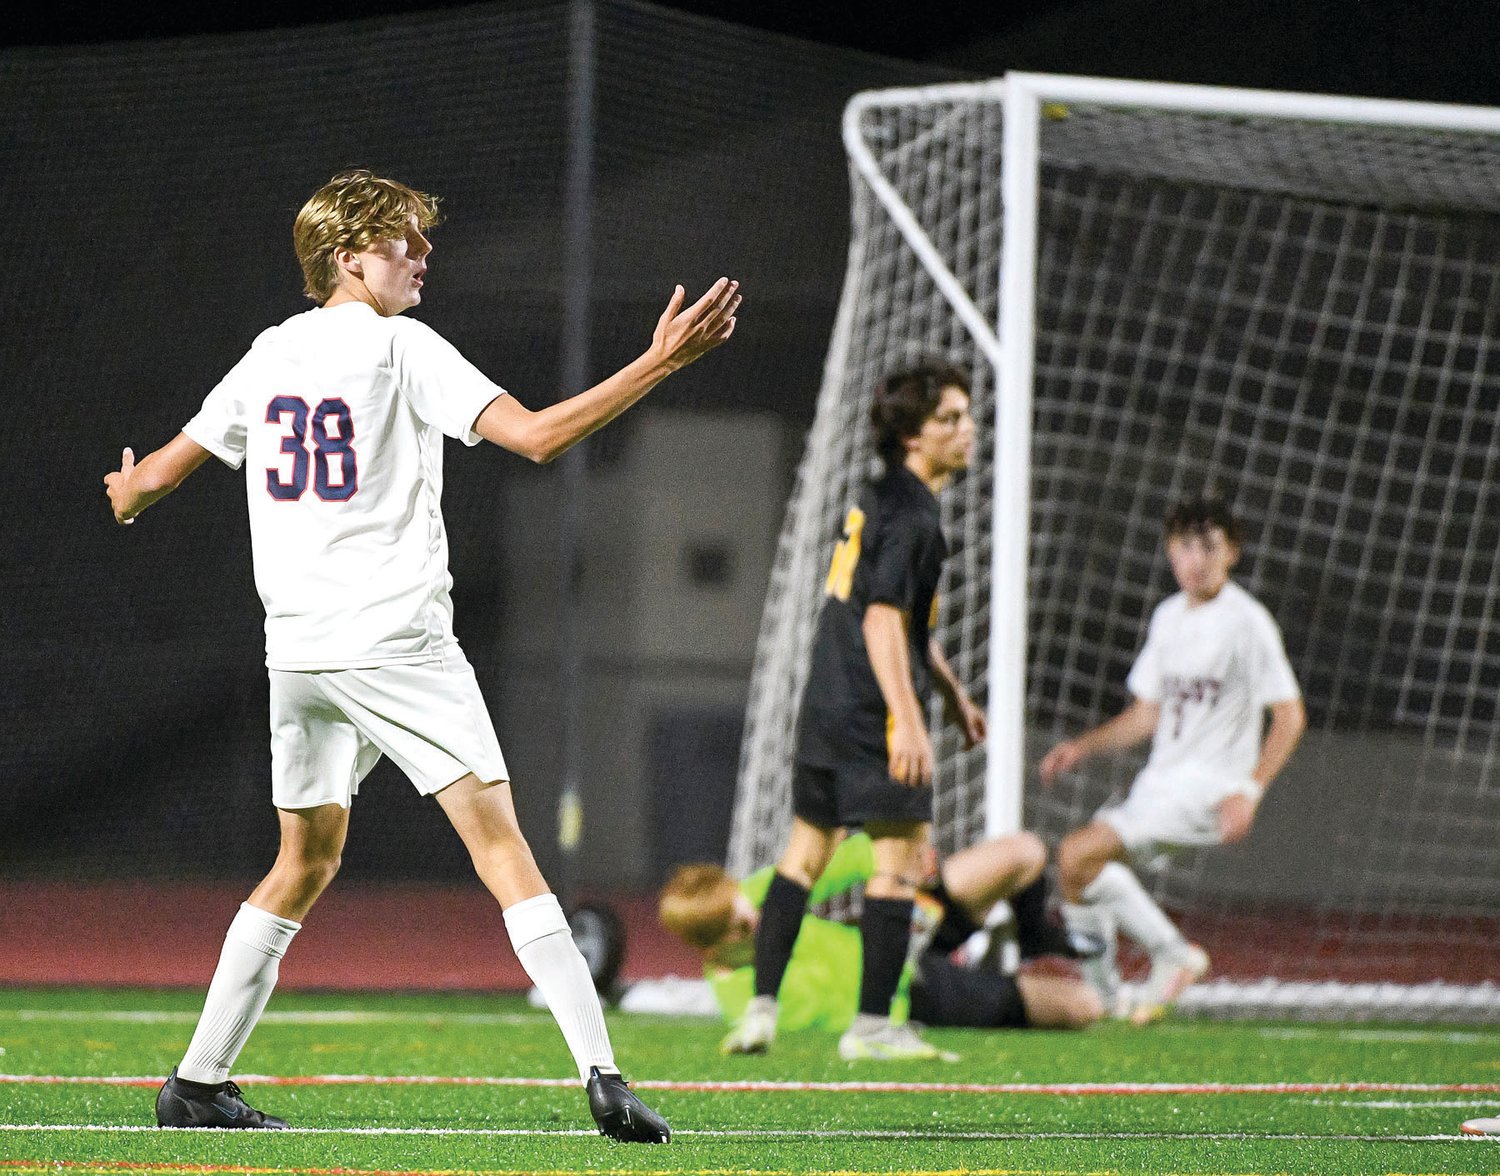 CB East’s Toby Senior can’t believe the ball went into the net after CB West scored on its own goal.